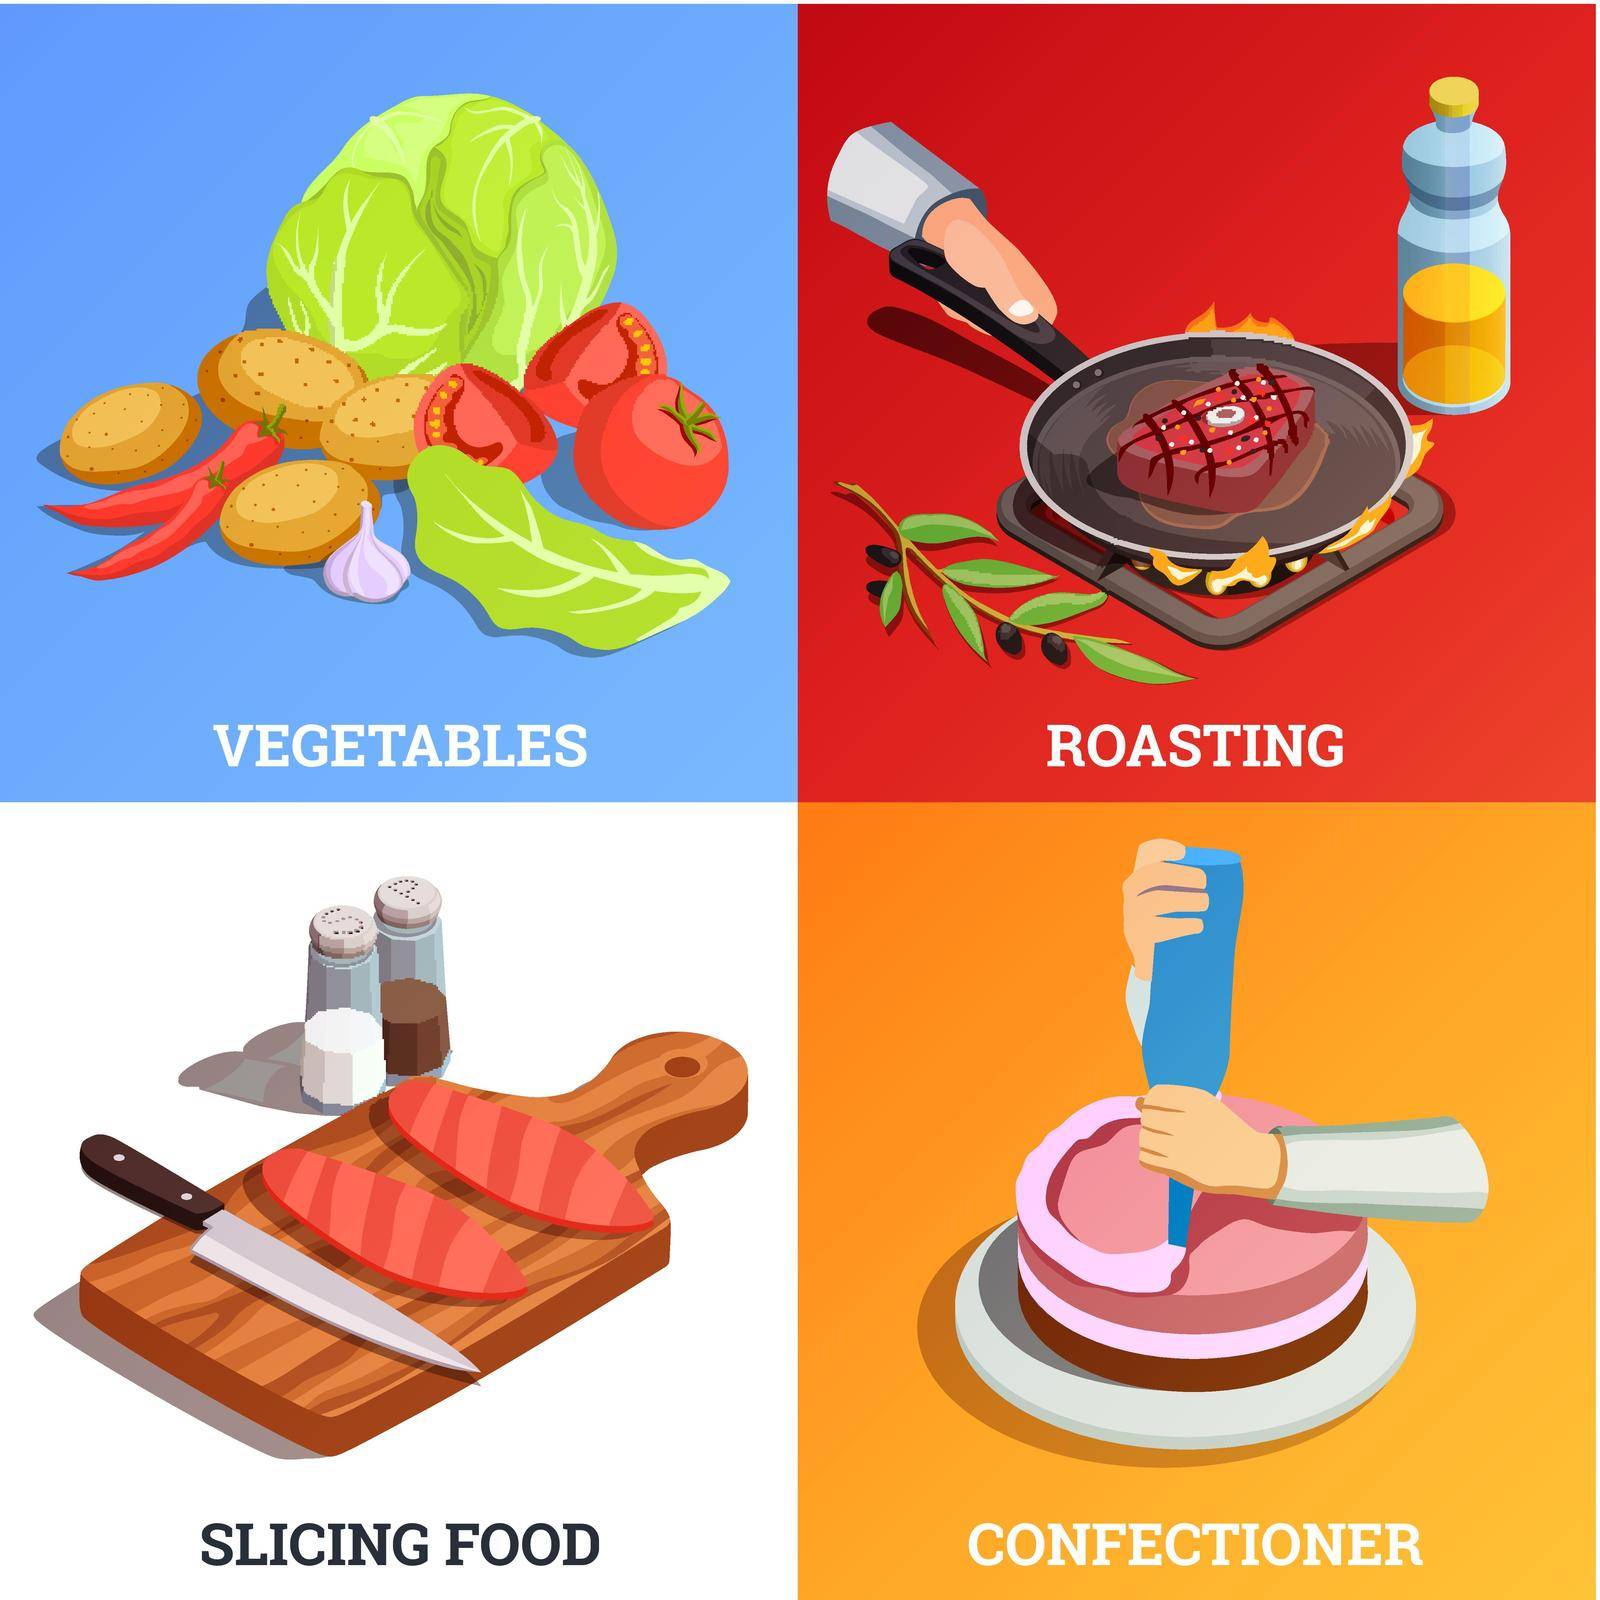 Professionlal cooking people chef pizzaiolo isometric people 2x2 design concept with various dishes and text captions vector illustration